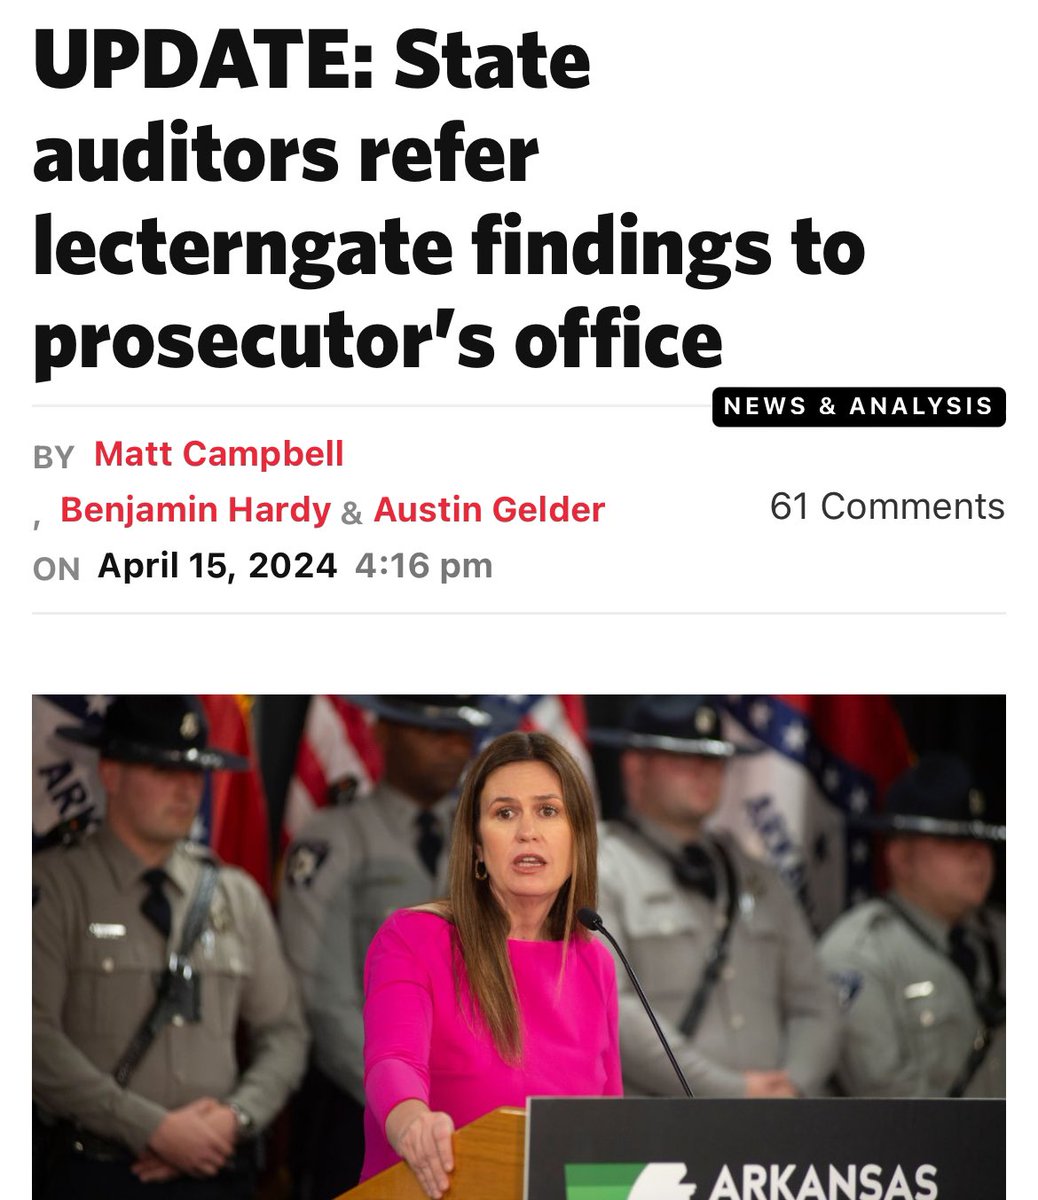 Will Sarah be held accountable for Lecterngate?